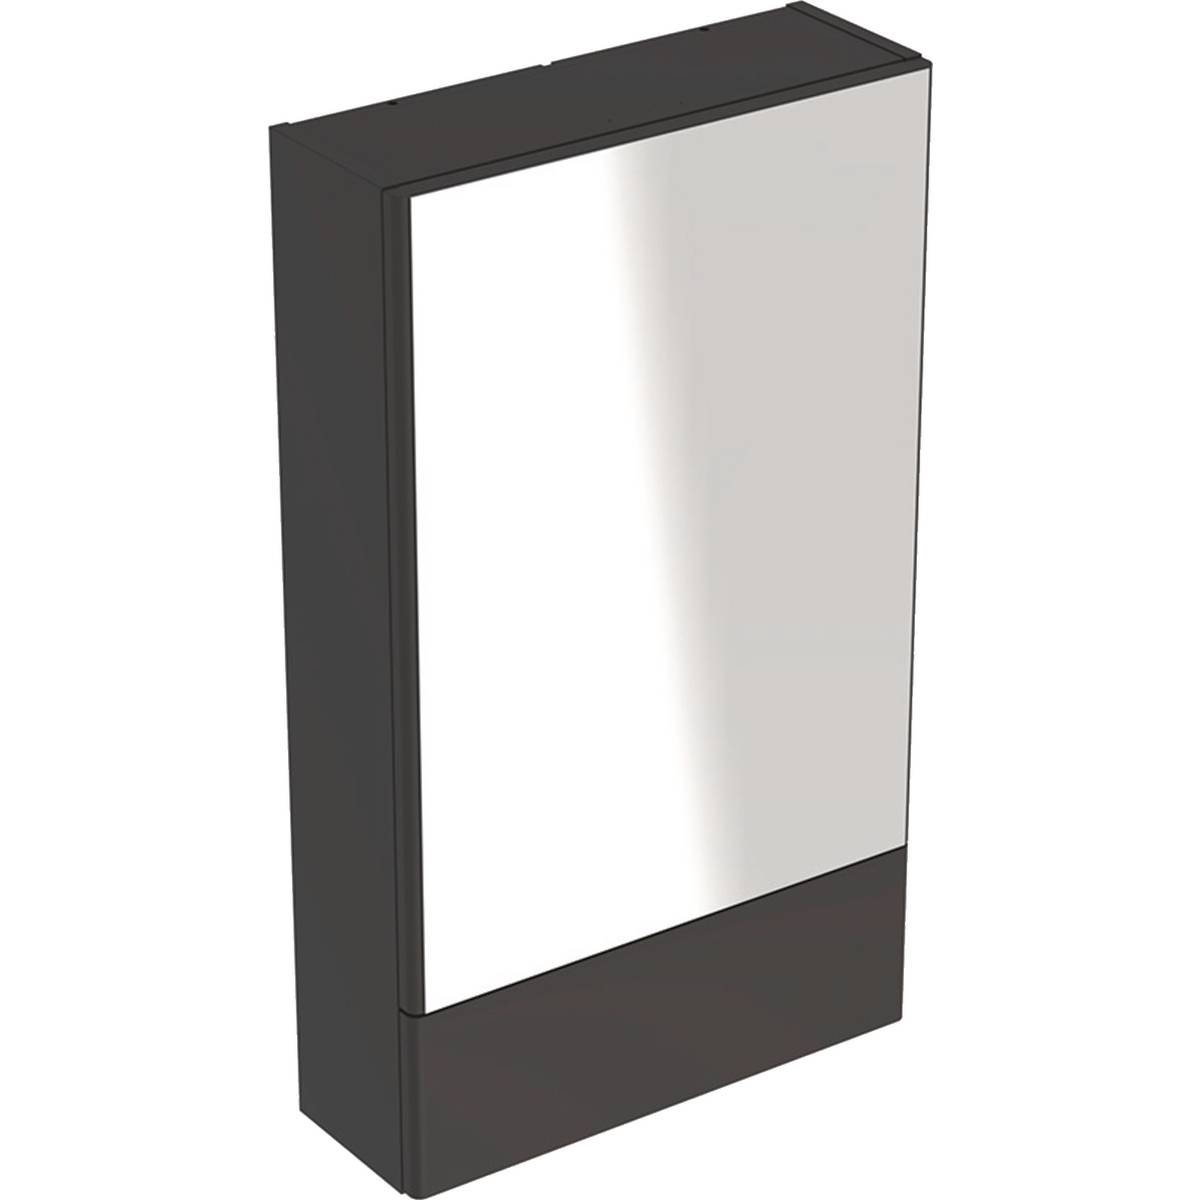 Selnova Square mirror cabinet with one door and one pull-down door